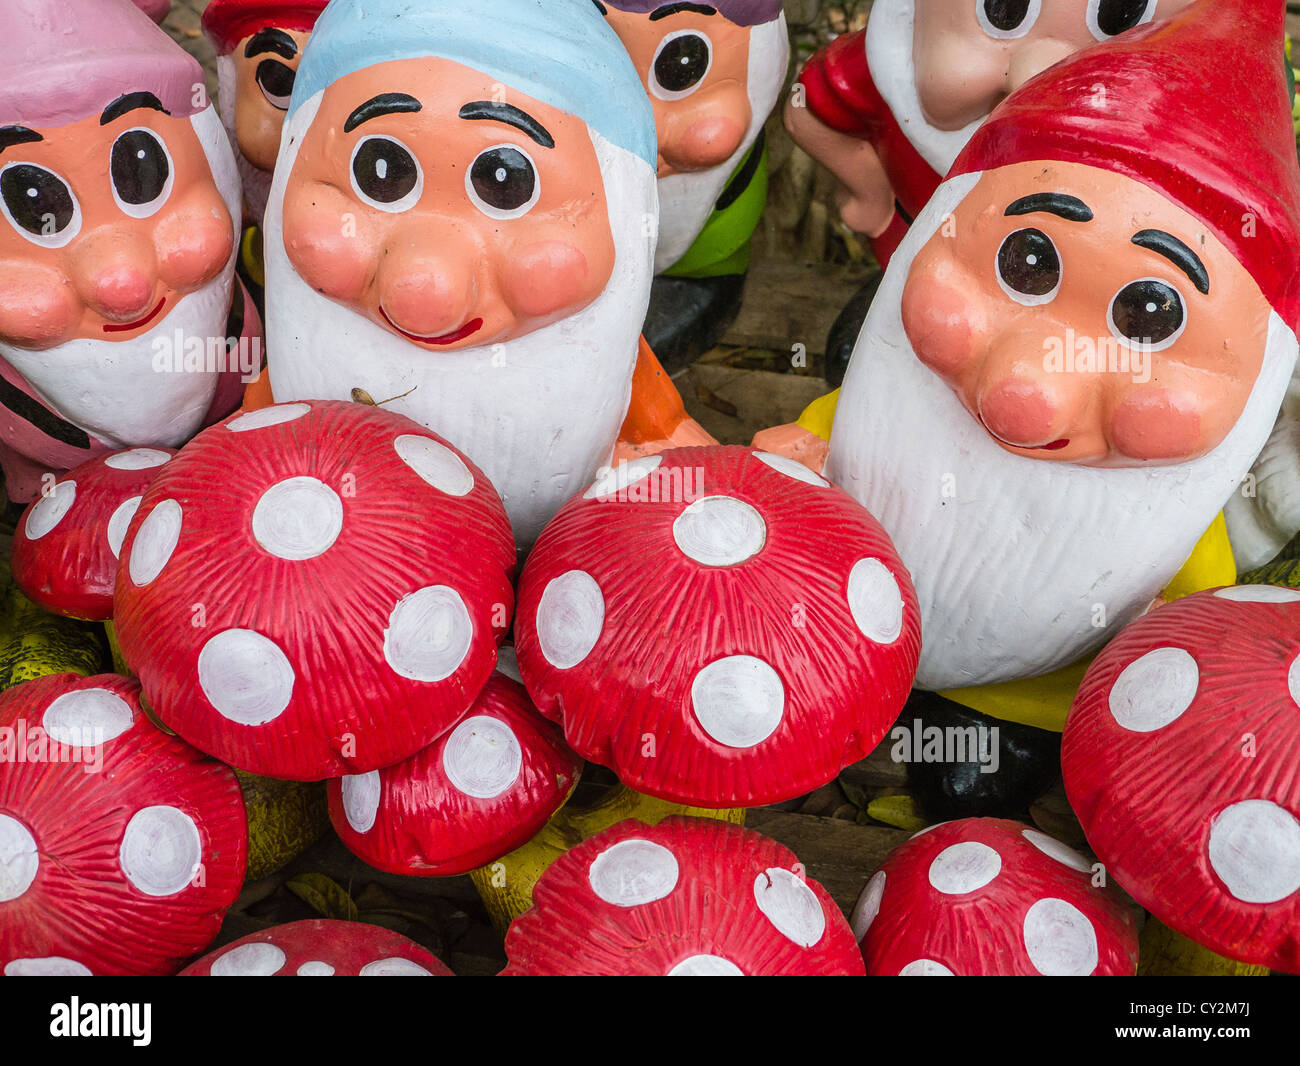 A group of trolls and mushrooms for sale as kitsch lawn art at a street market in Asunción Paraguay. Stock Photo